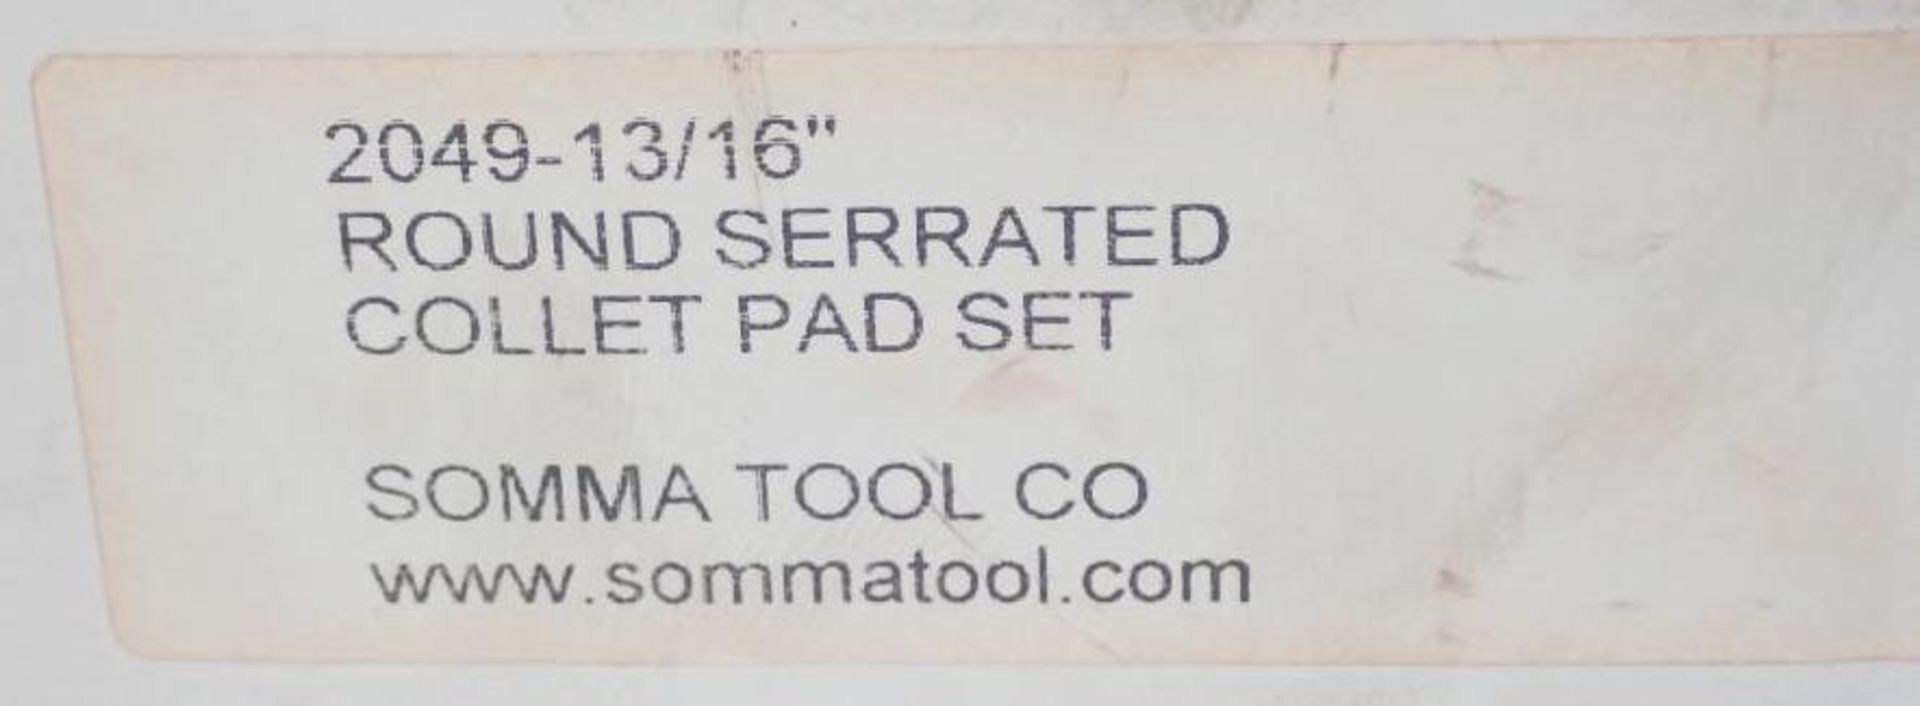 Somma Collet Pad Set - Image 4 of 8